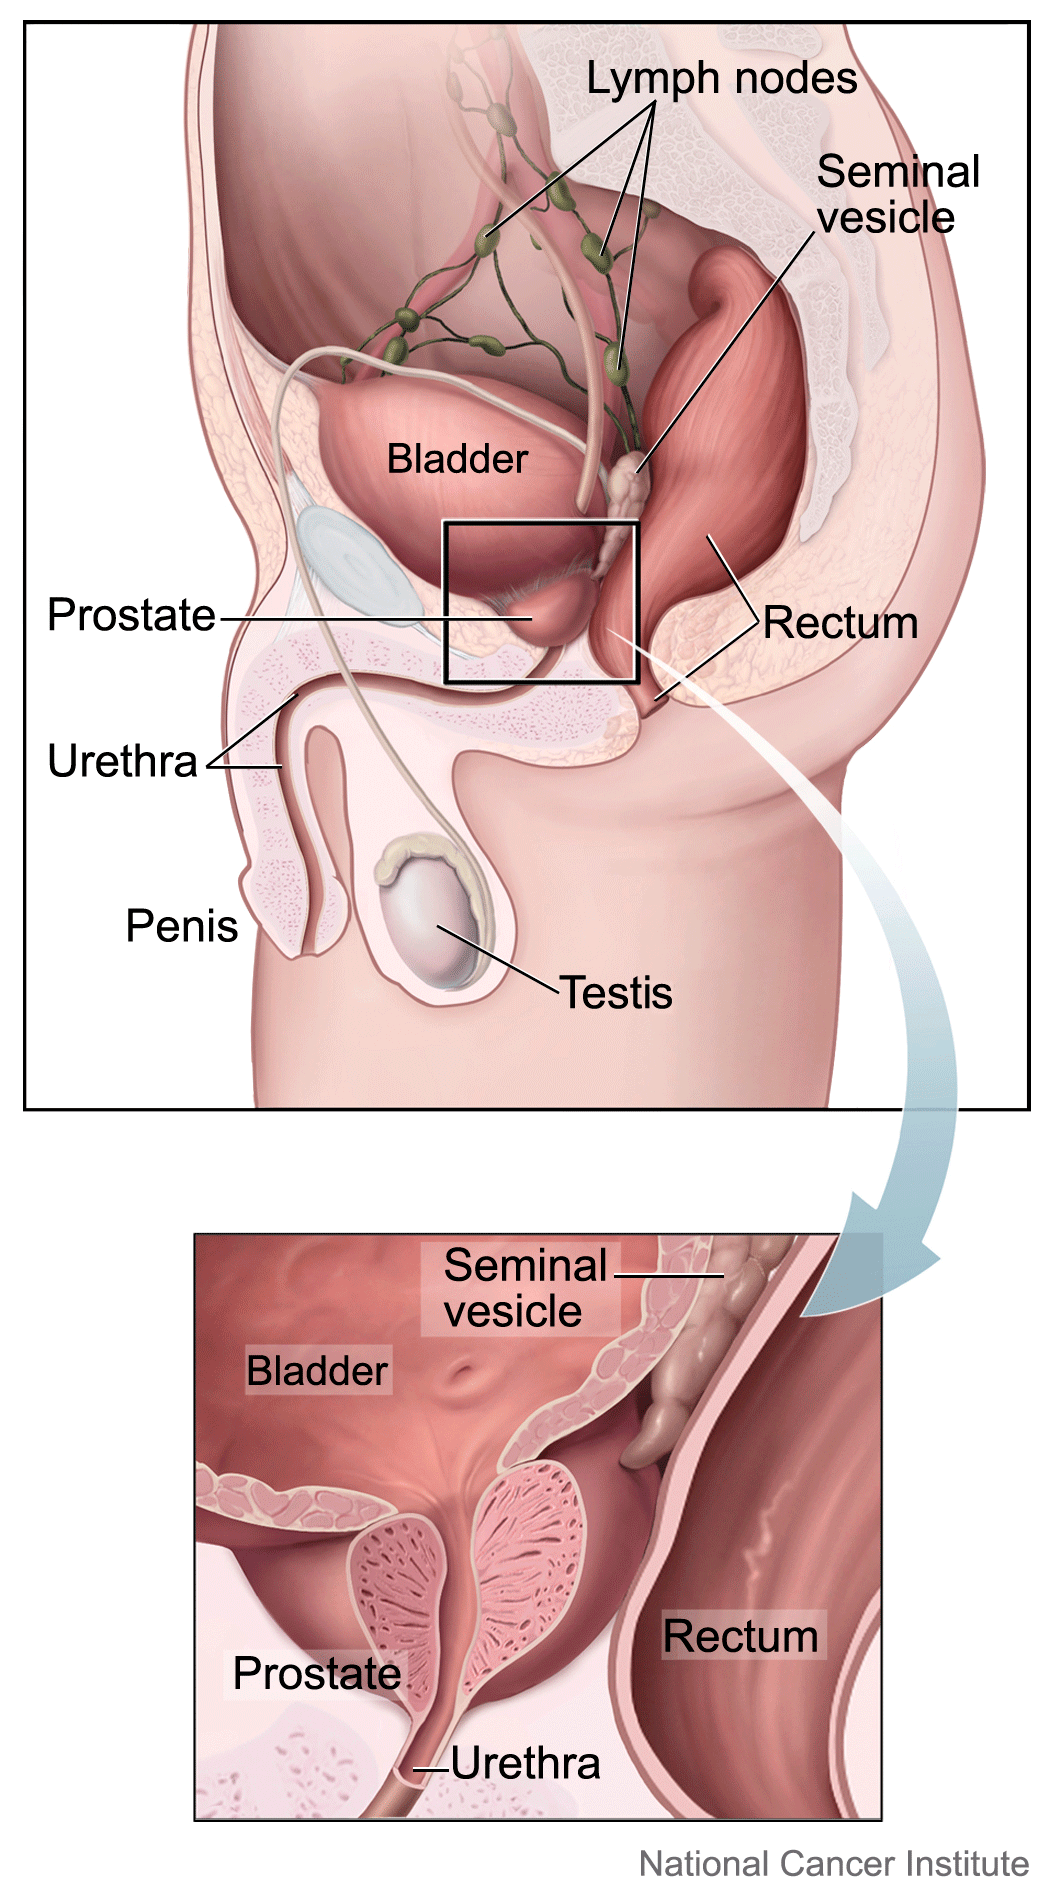 Prostate gland and nearby organs.png